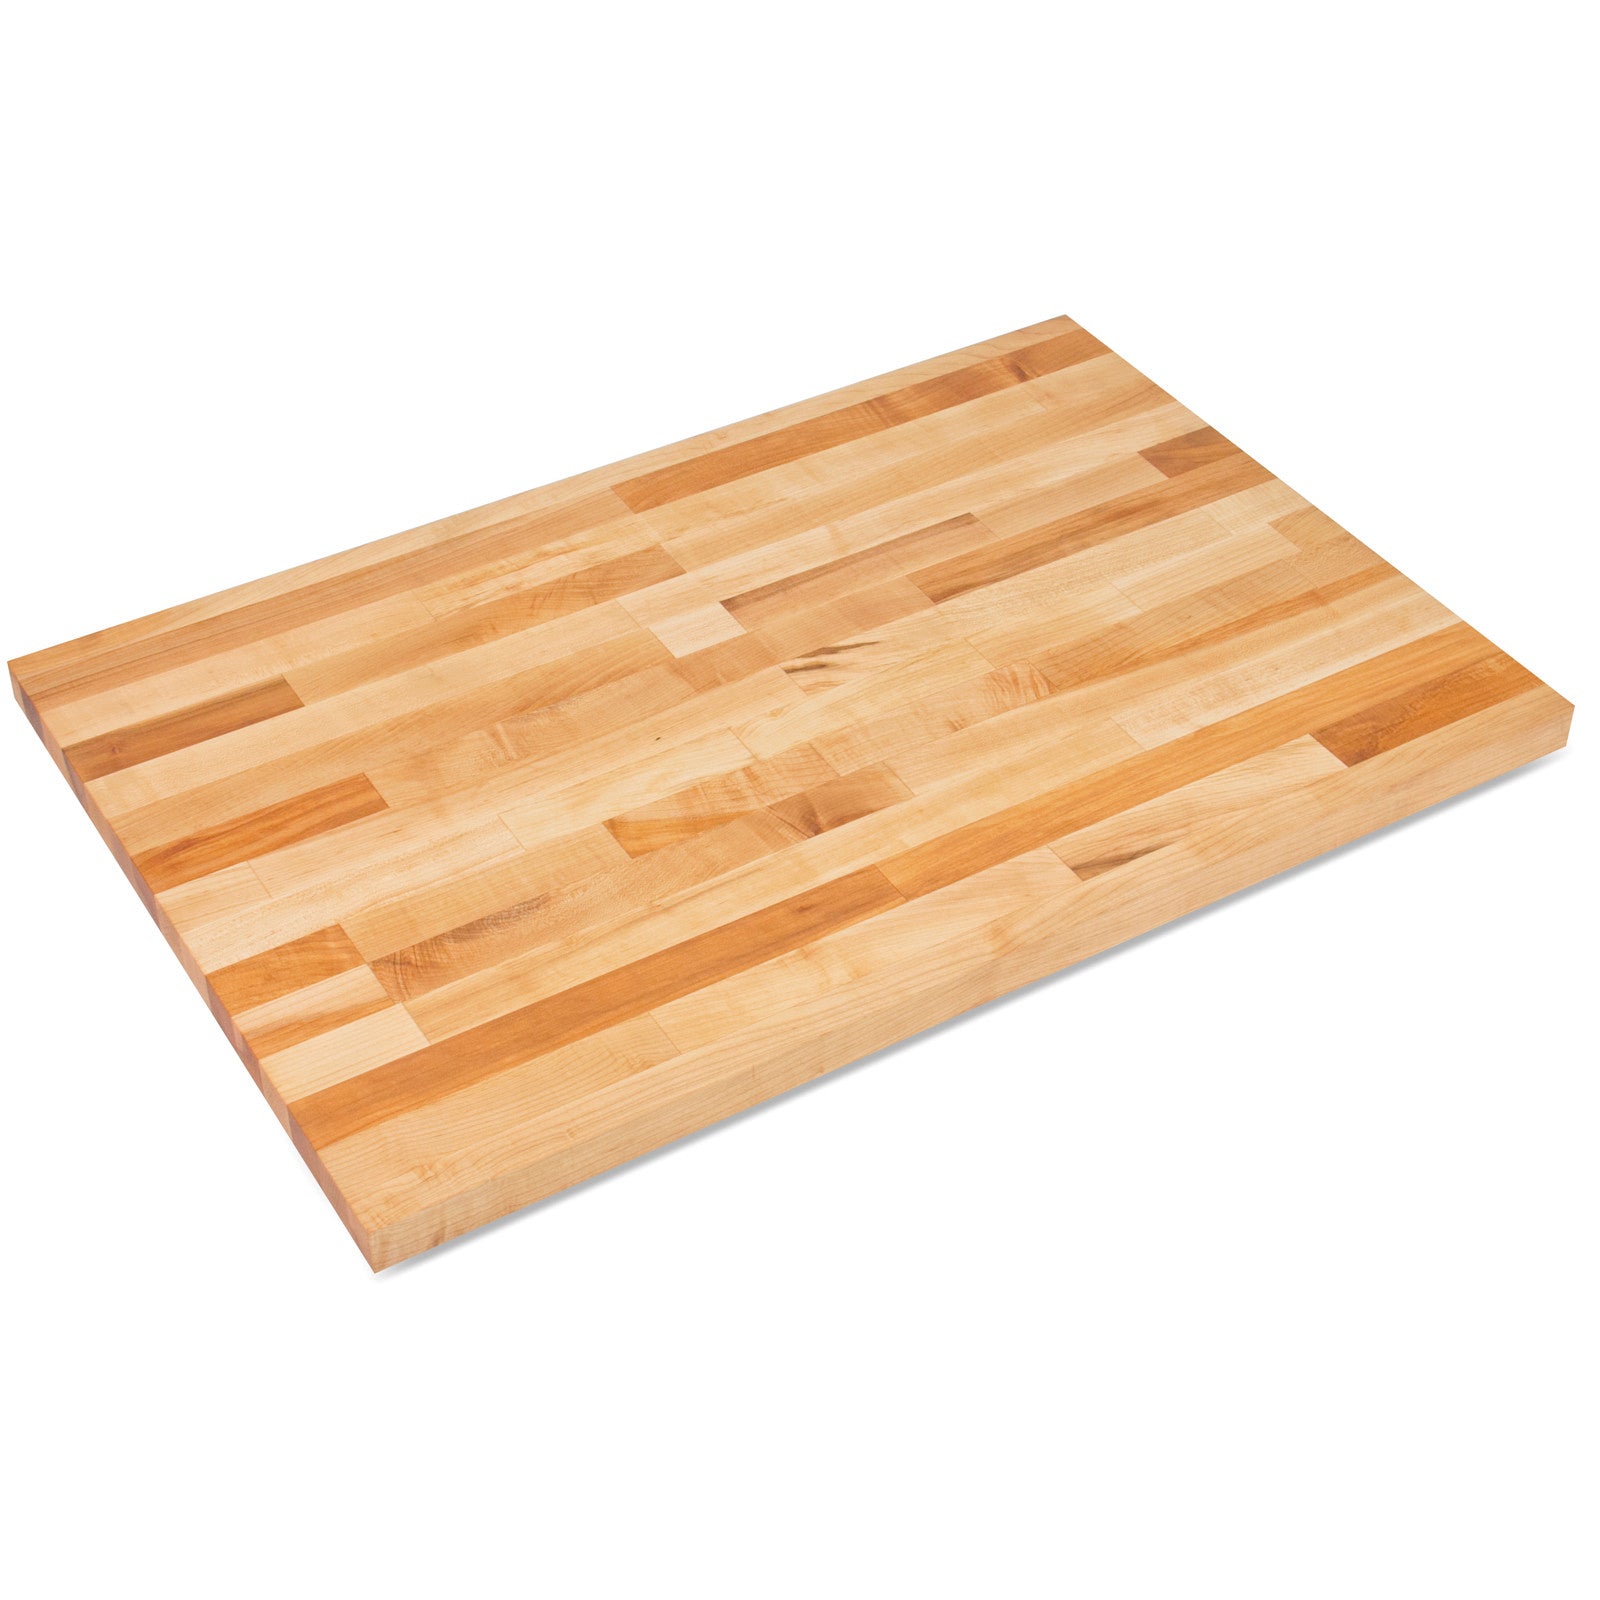 John Boos SC011-O Maple 1 3/4" Thick Replacement Top - 48 X 30 X 1.75